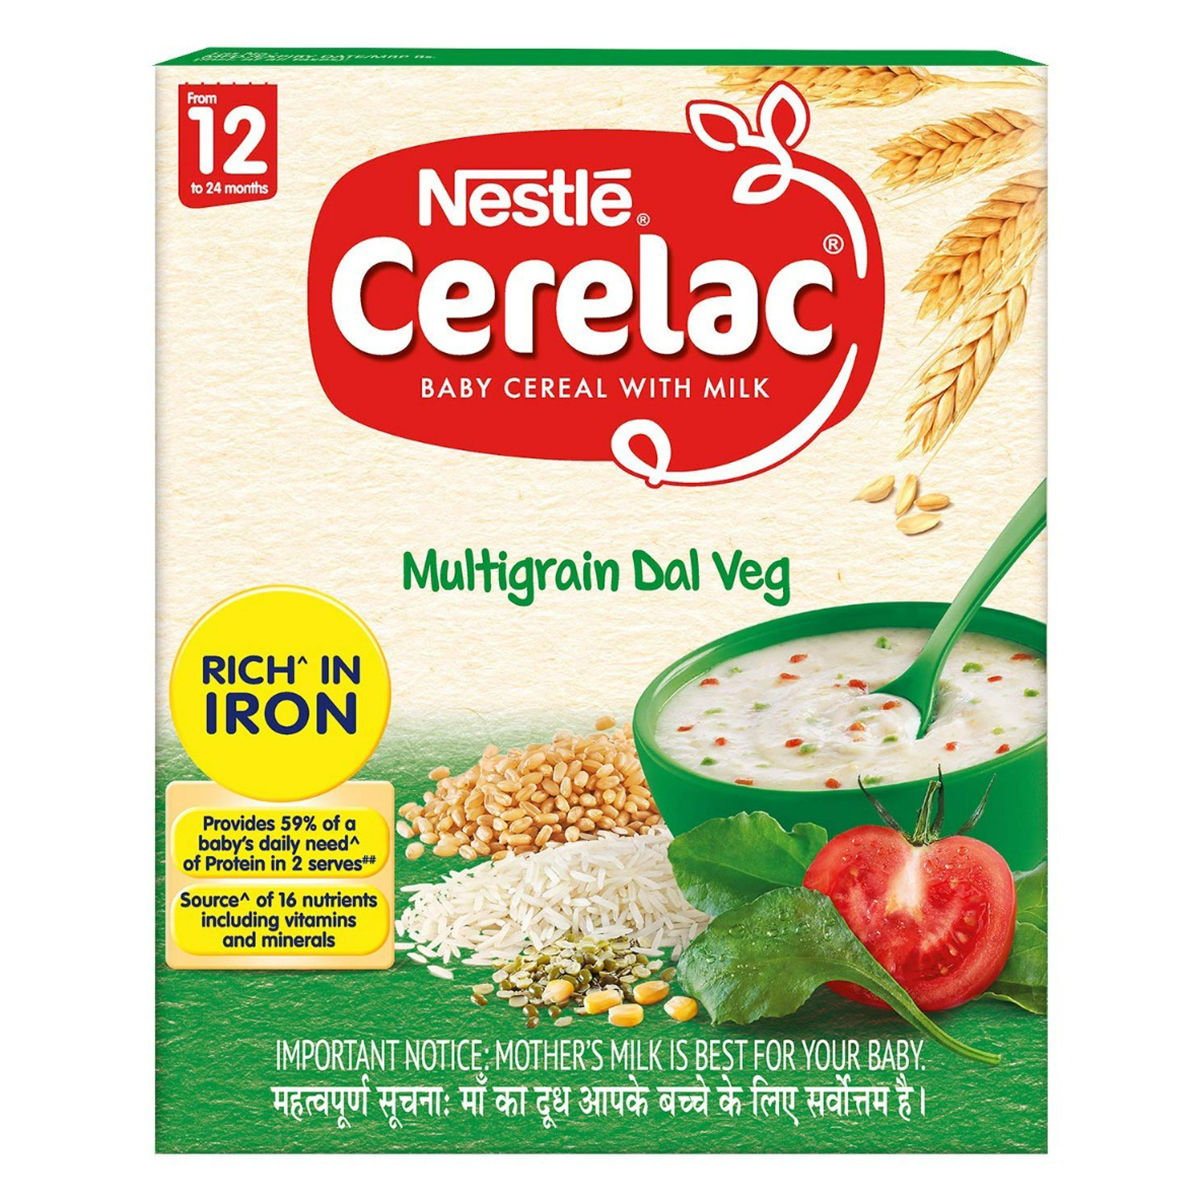 Buy Nestle Cerelac Baby Cereal with Milk Wheat Multigrain Dal Veg (From 12 to 24 Months) Powder, 300 gm Refill Pack Online